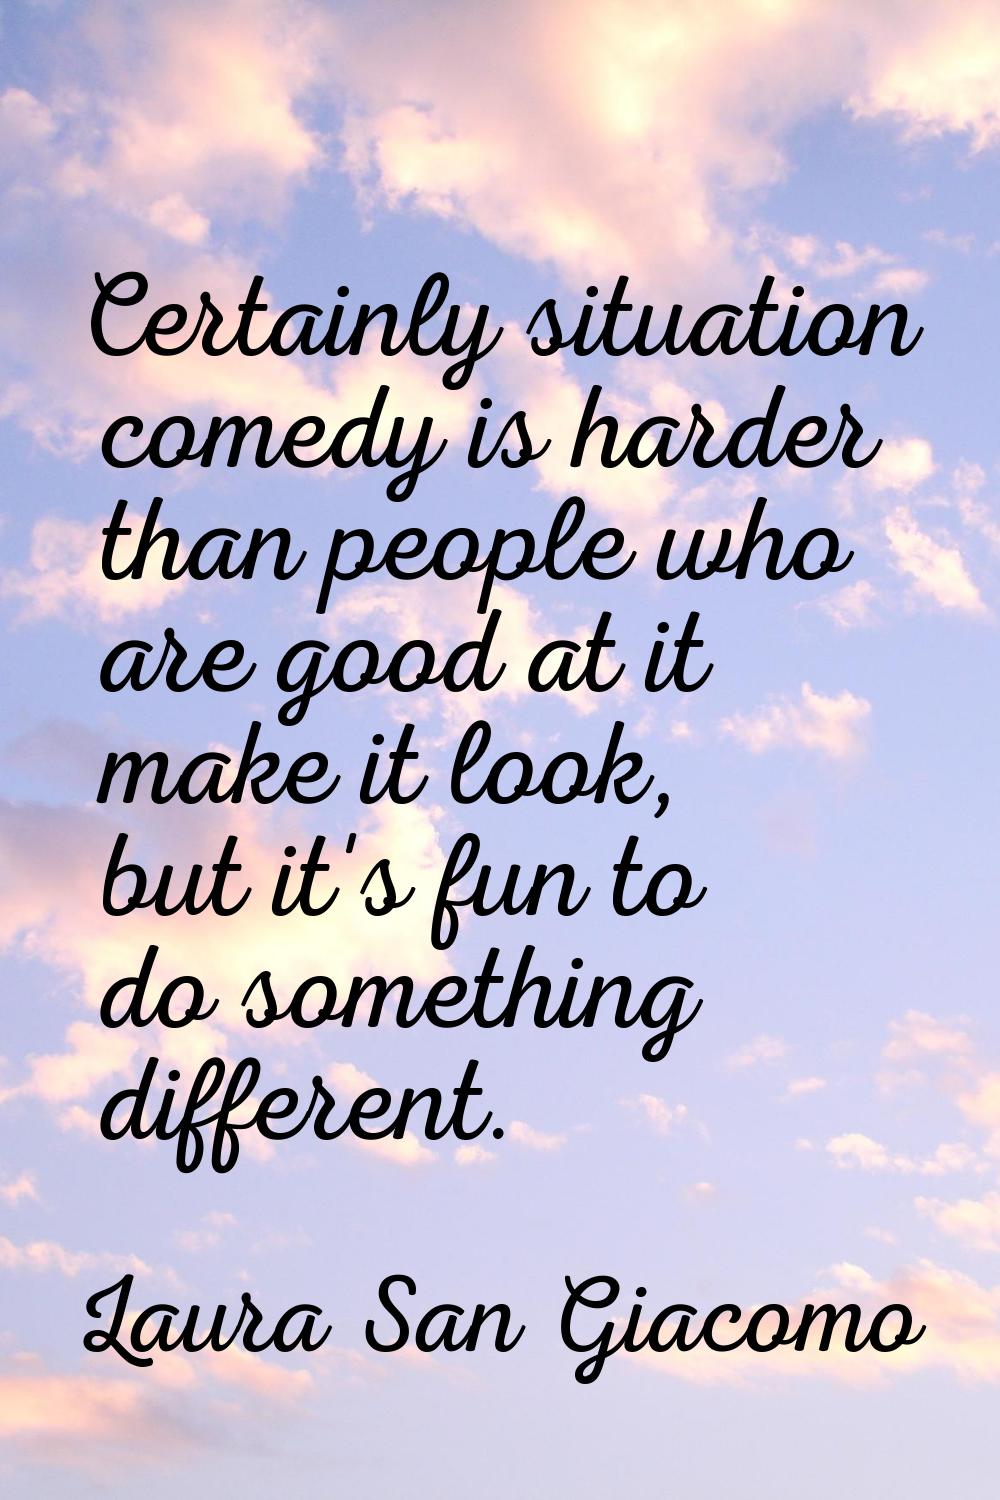 Certainly situation comedy is harder than people who are good at it make it look, but it's fun to d